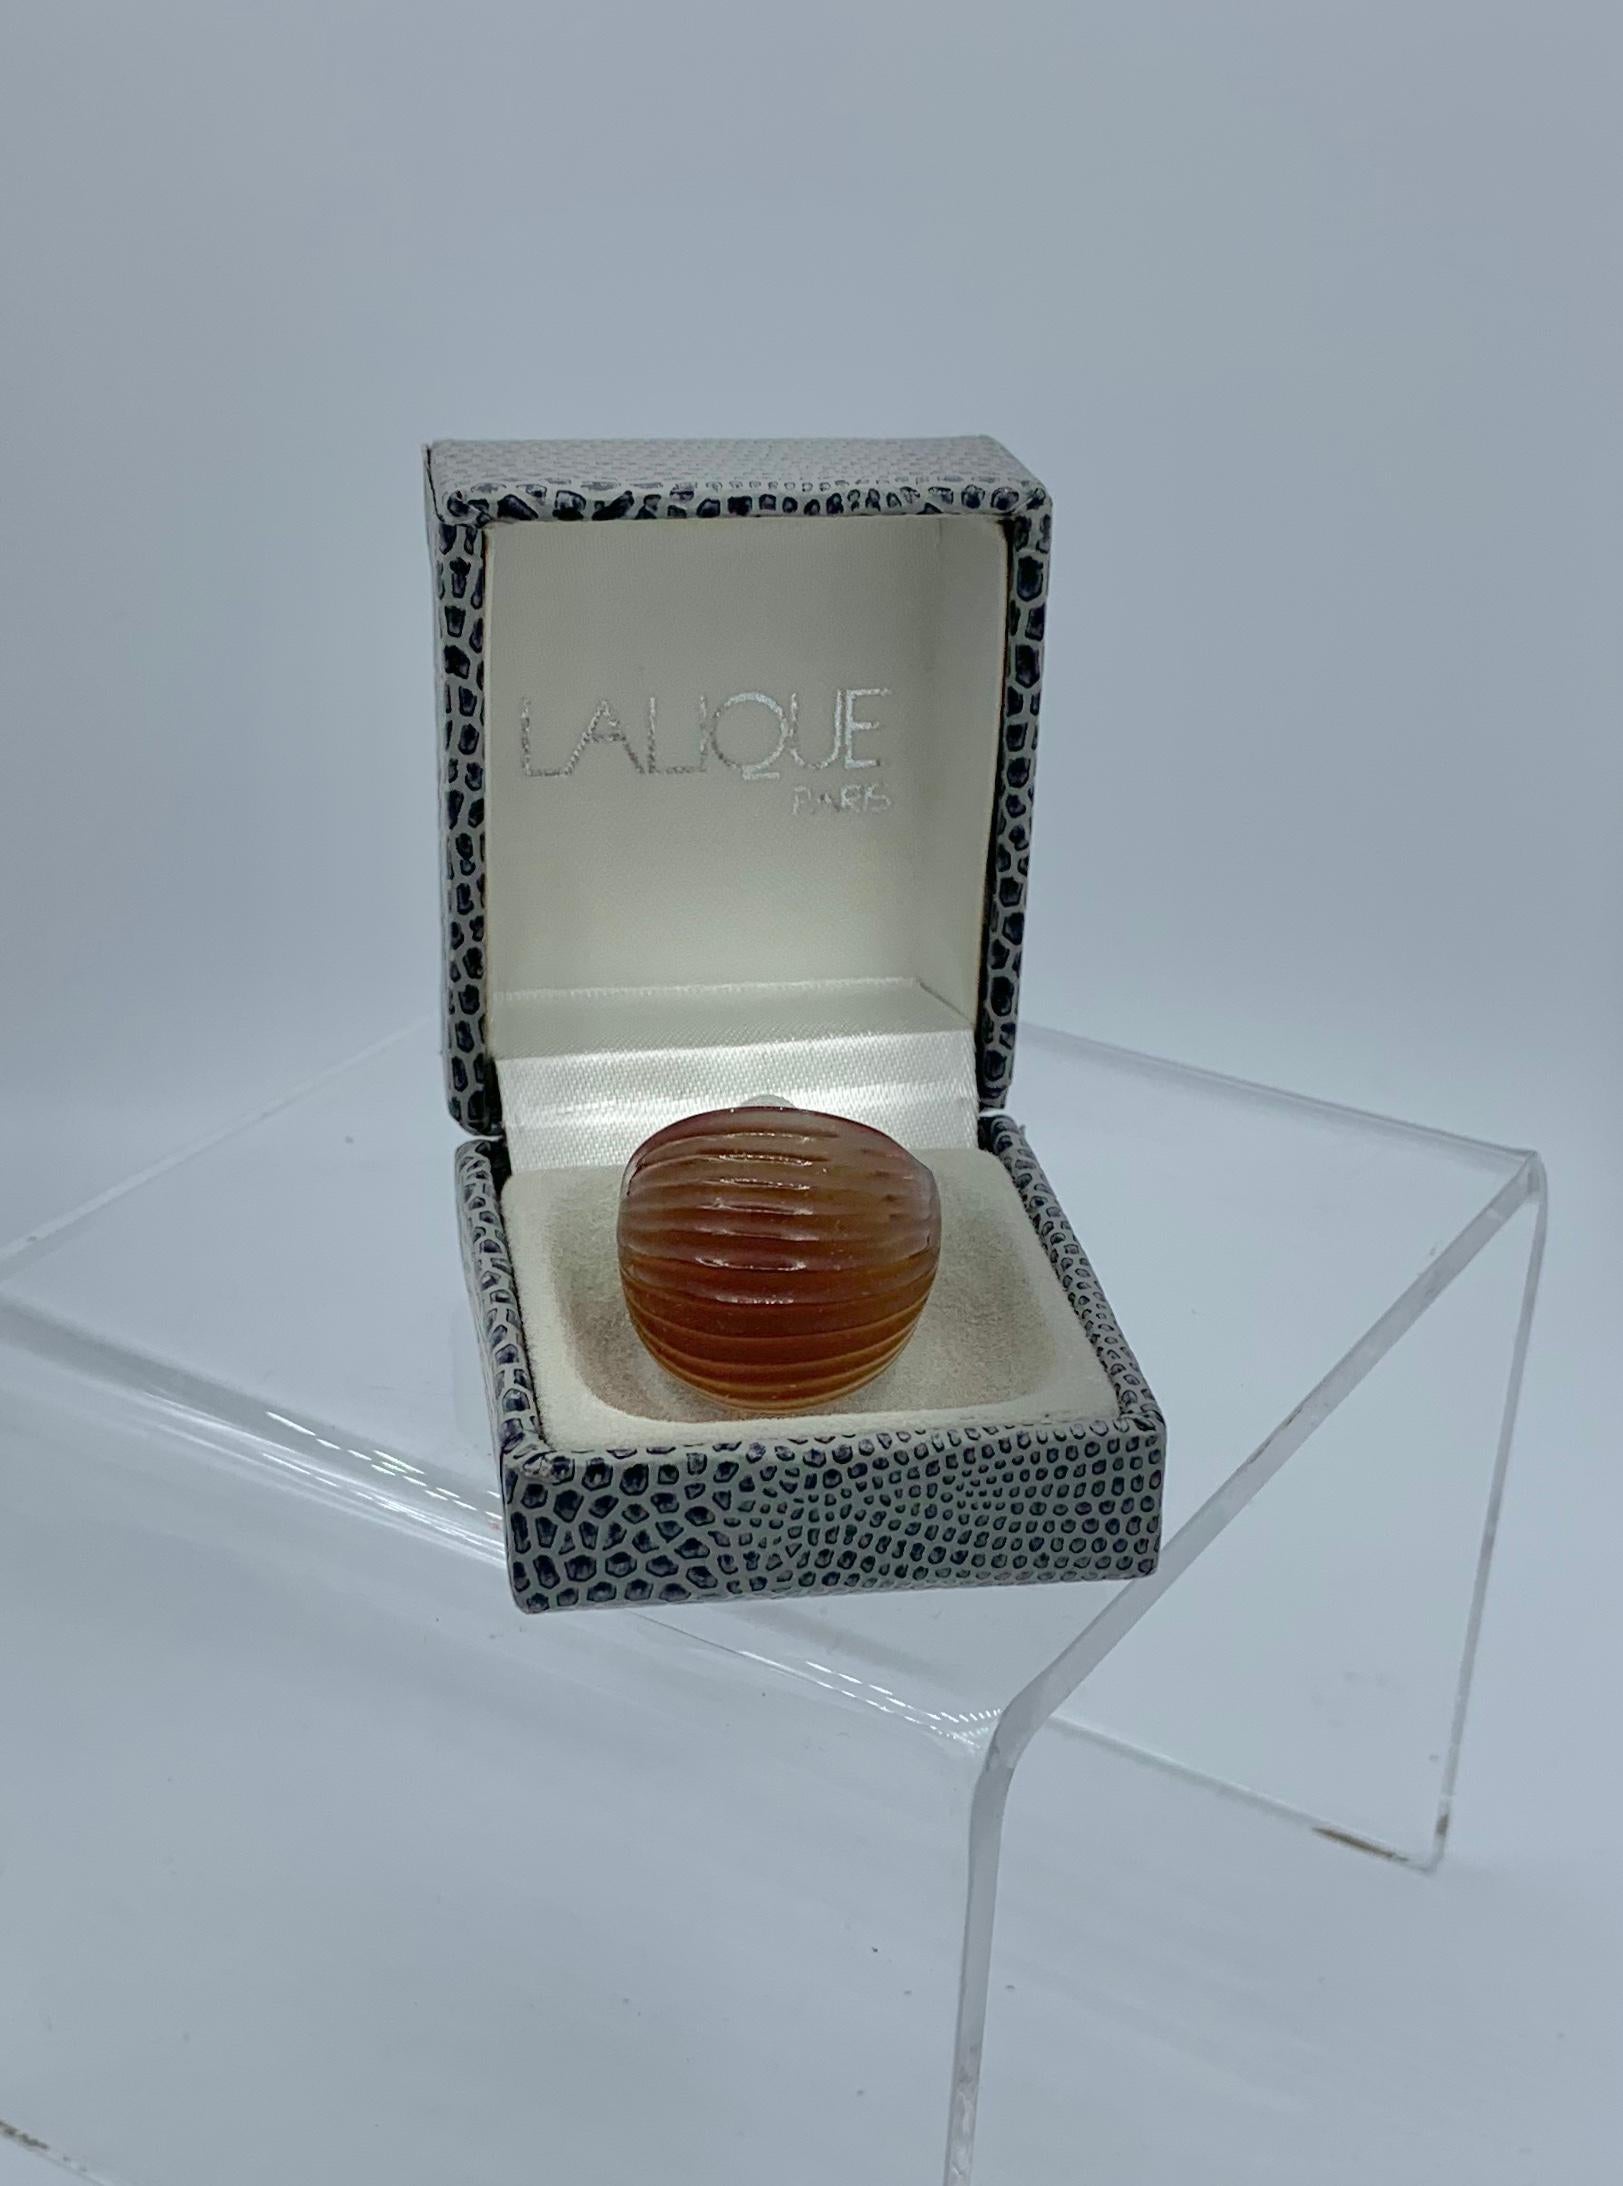 This is the 1990s version of Lalique's iconic ‘cabochon’ ring created in 1931.  The glass ring is inspired by the natural shell pattern of the Nerita shell.  The delicately chiseled lines in the dome evoke the form of the Nerita shell.  The color of